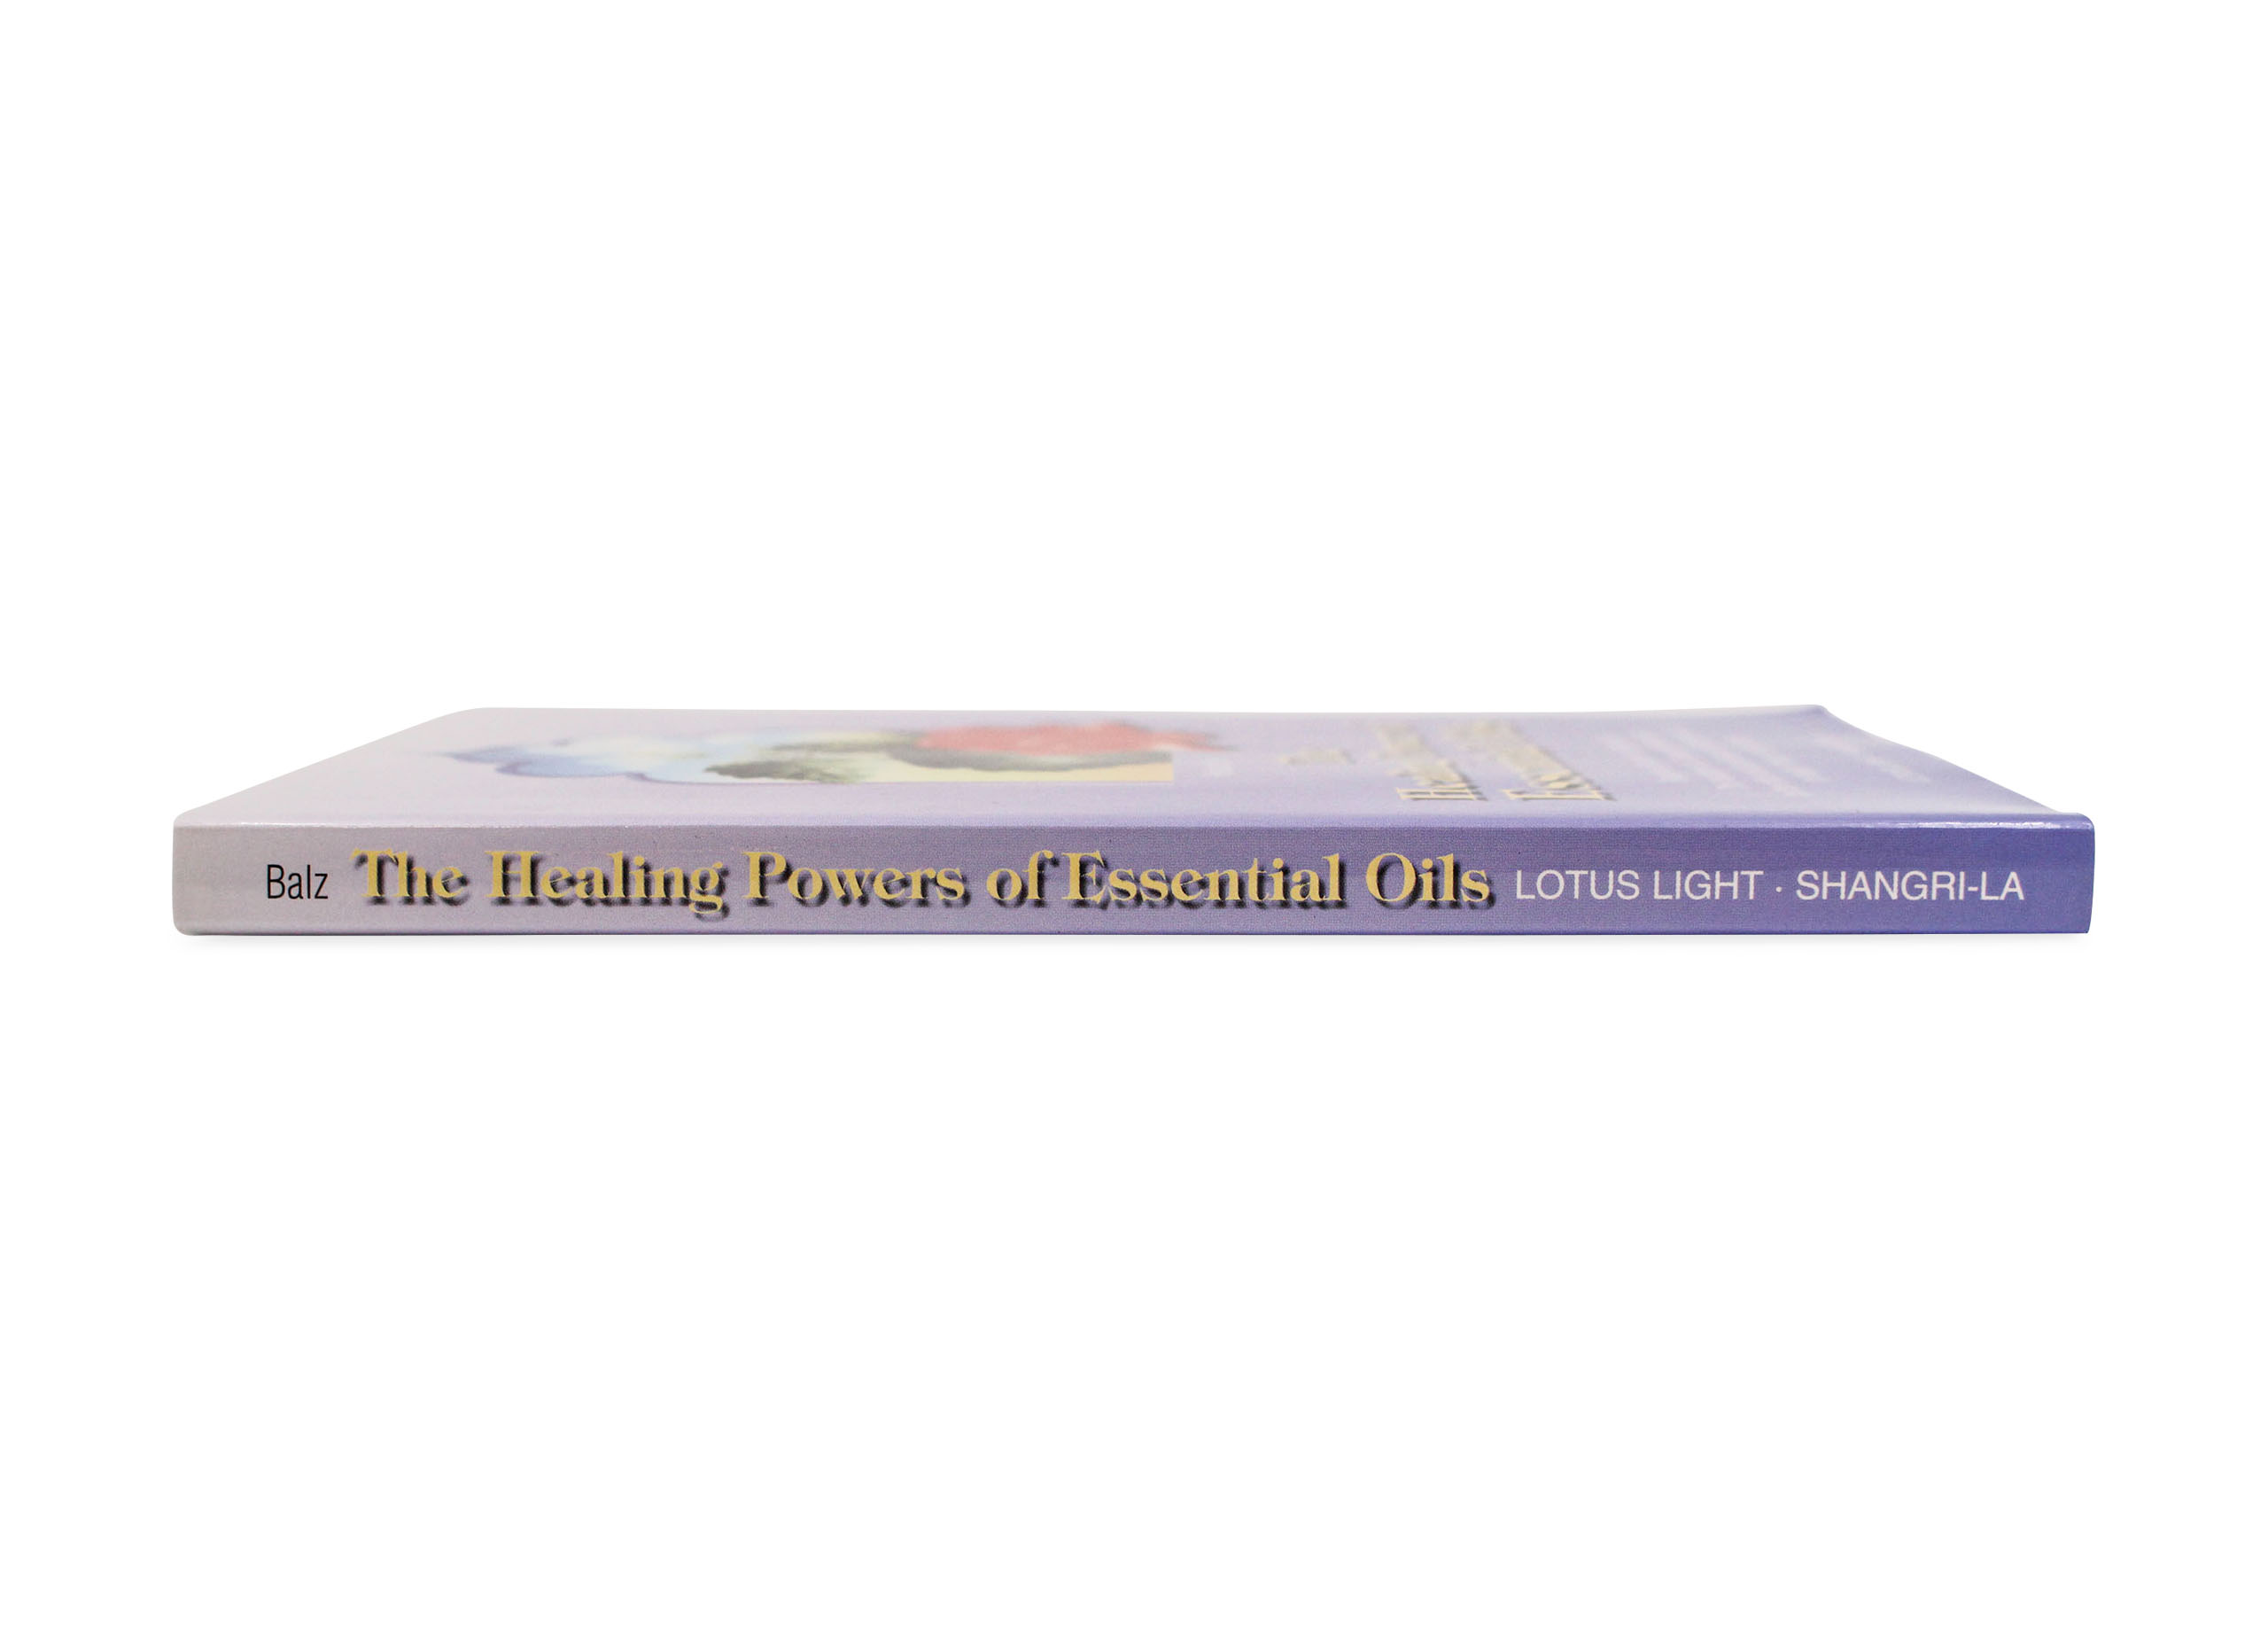 The Healing Power of Essential Oils By Rodolphe Balz - Crystal Dreams